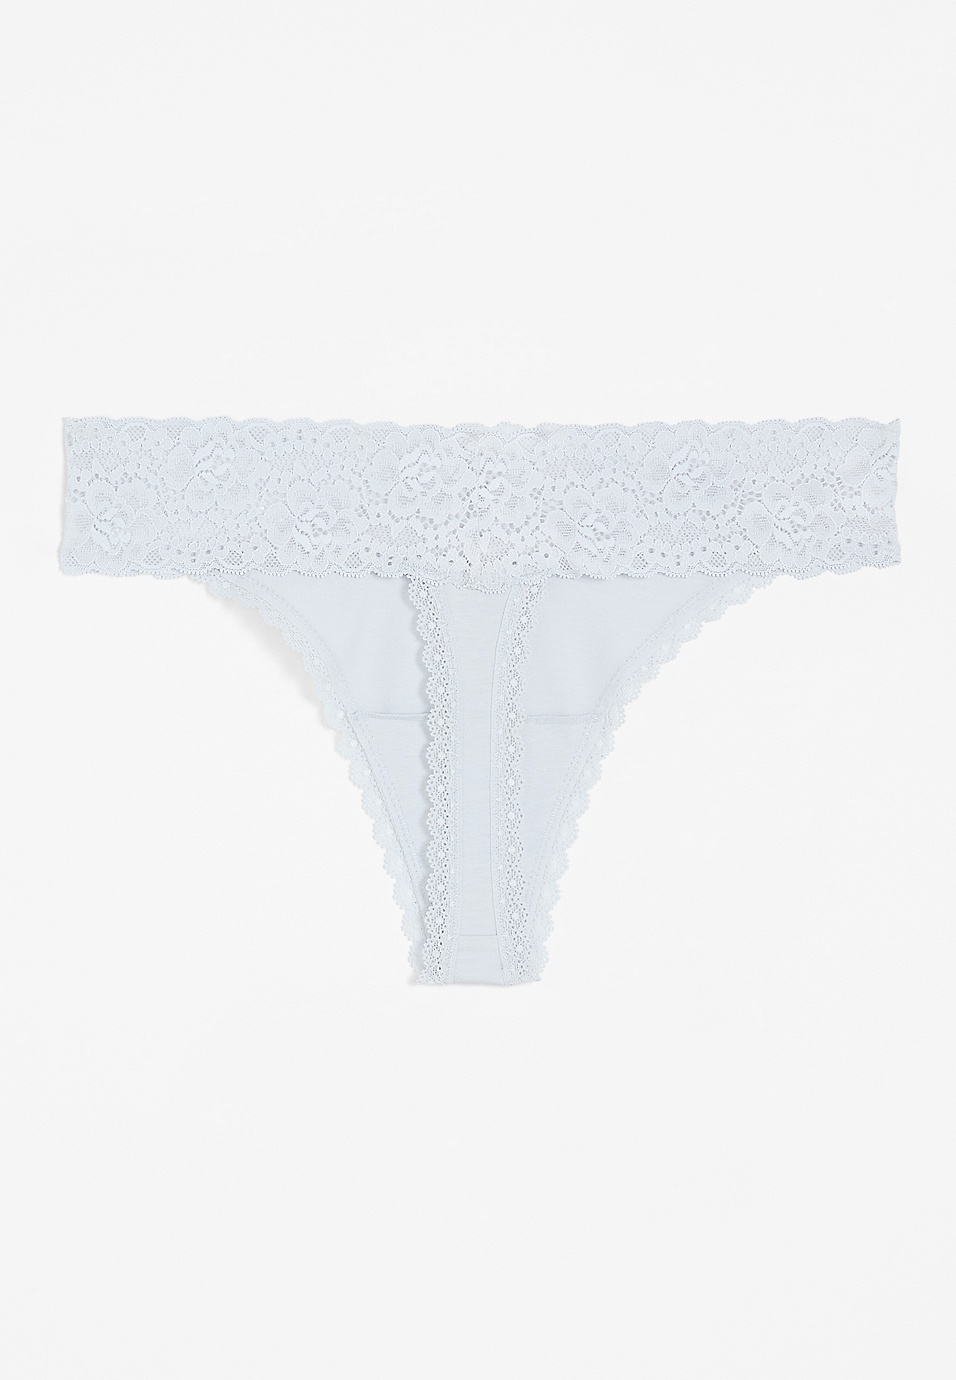 Cotton Essentials Lace-Trim Mid-Rise Thong Panty in Green